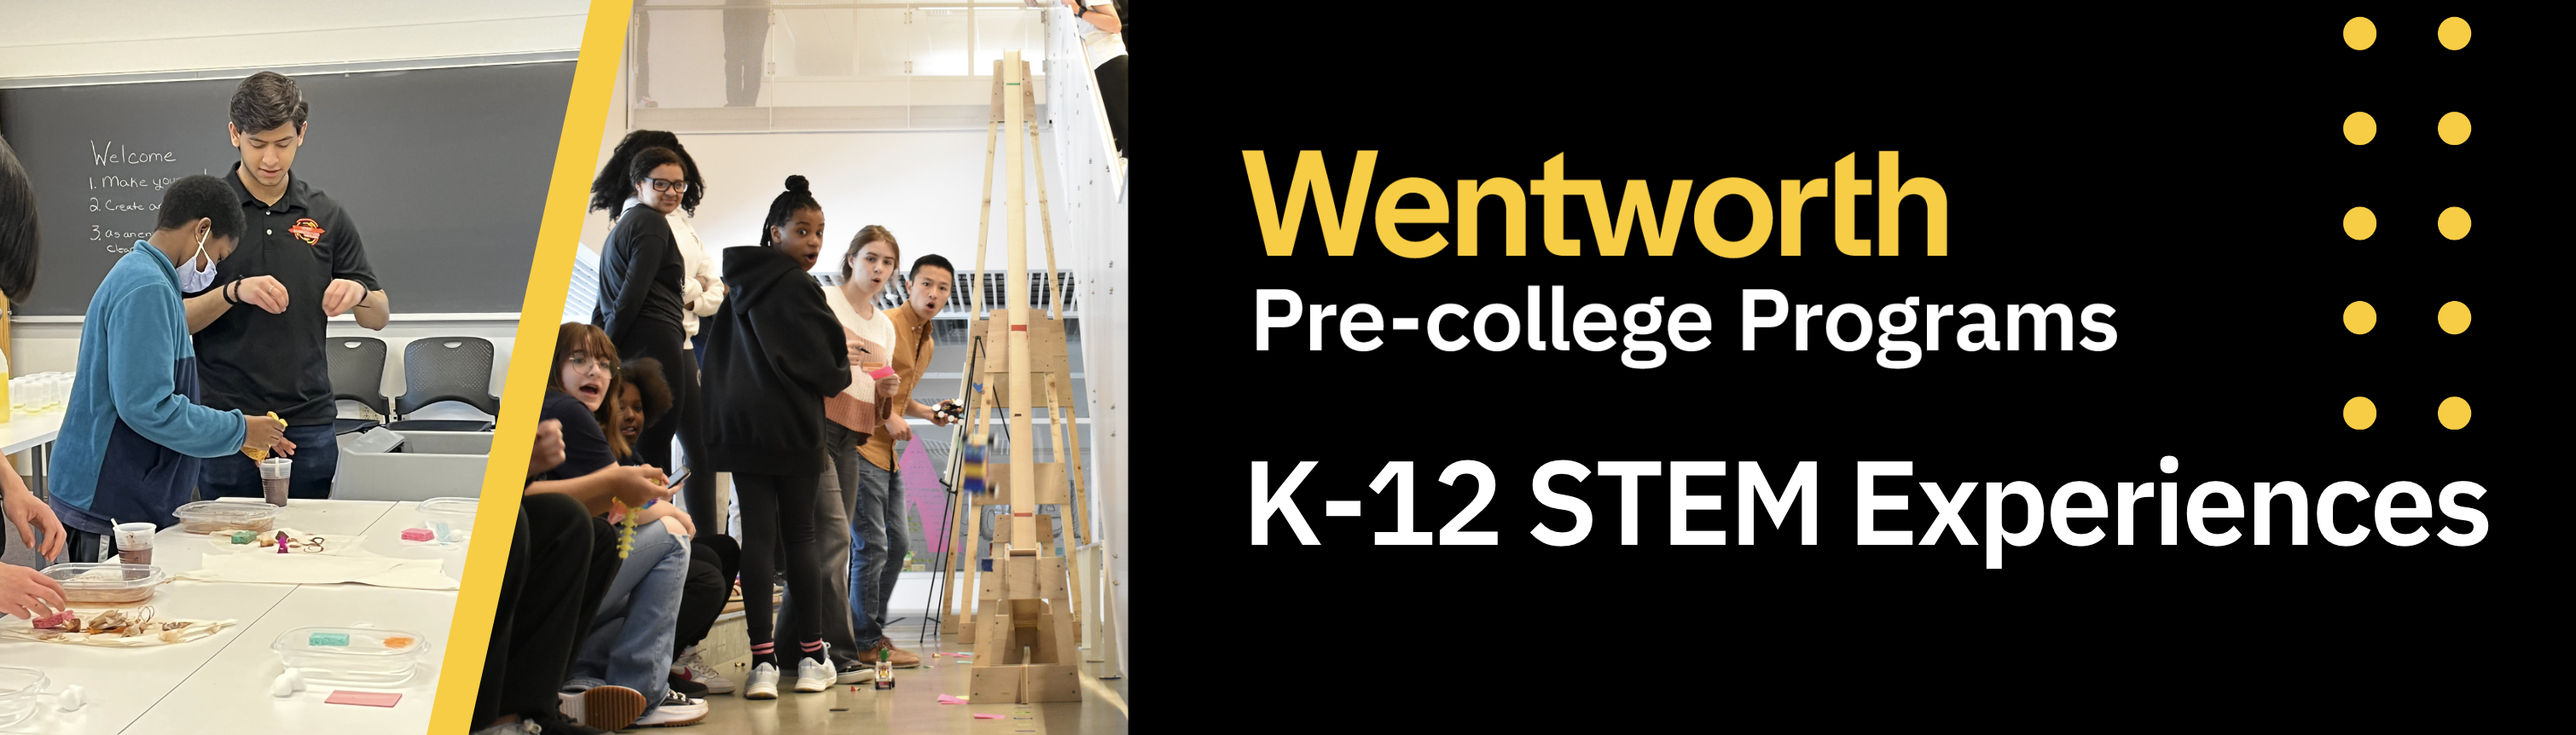 K-12 STEM Experiences hosted by Wentworth Pre-college Programs